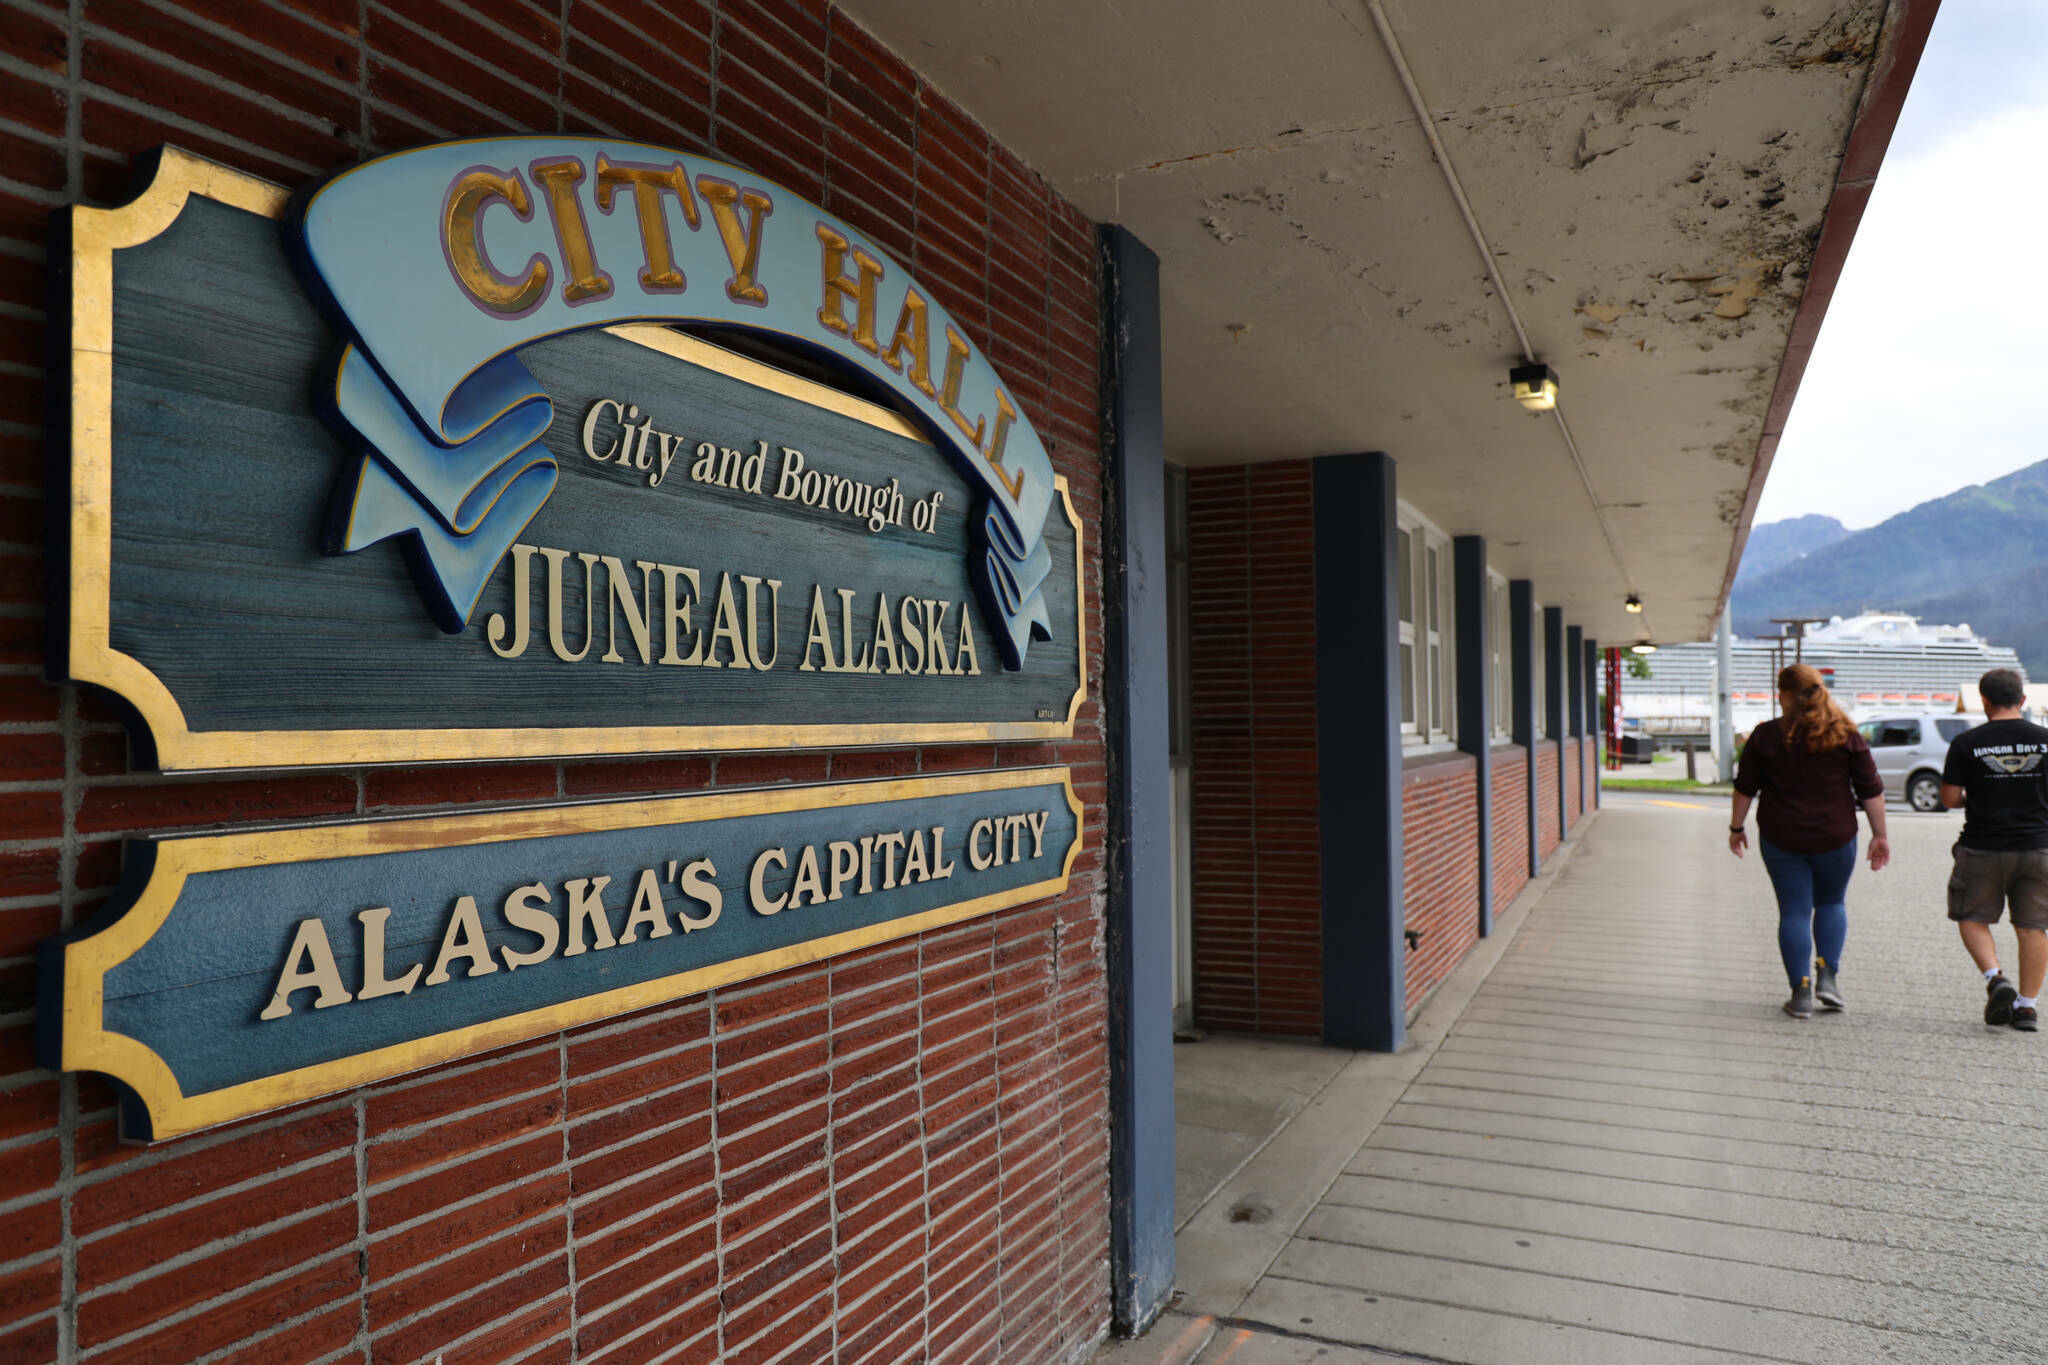 Voters in the City and Borough of Juneau municipal election will decide this fall whether to approve $27 million in bond debt to fund the majority of the construction cost for a new City Hall. A similar $35 million measure was rejected last year. (Clarise Larson / Juneau Empire File)